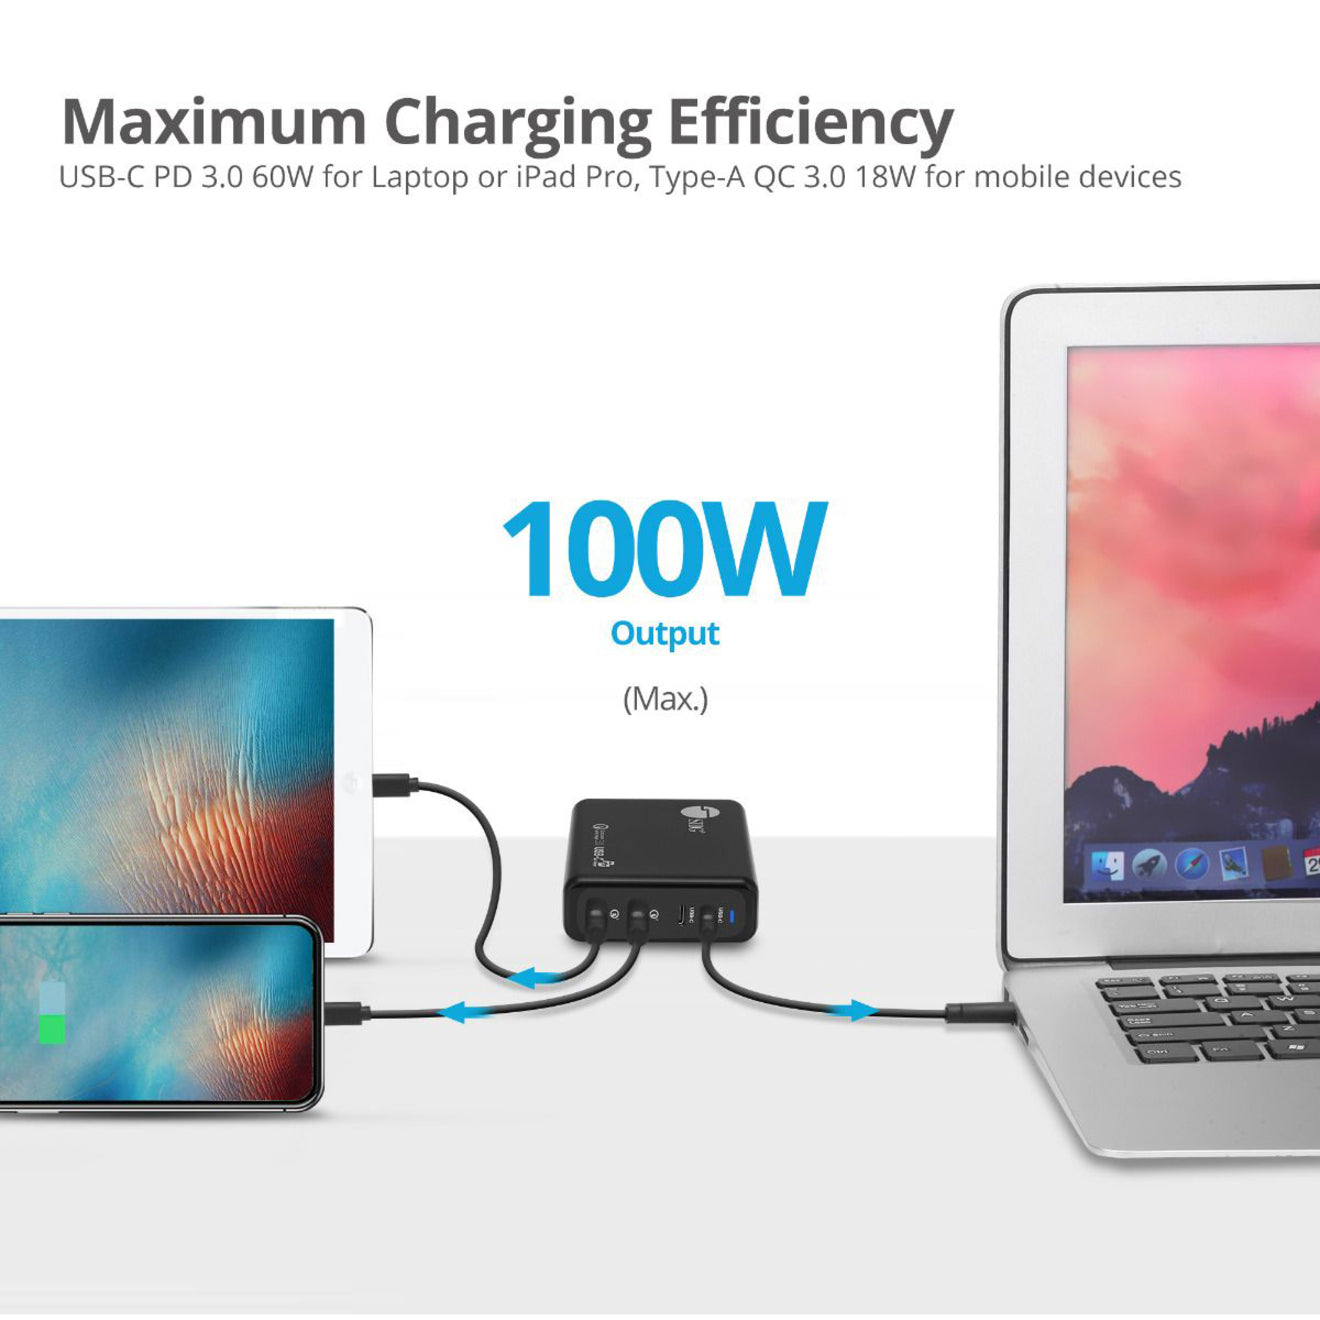 SIIG AC-PW1N11-S1 100W Dual USB-C PD Charger with QC 3.0 Combo Power Charger, Fast Charging for USB Type C Devices